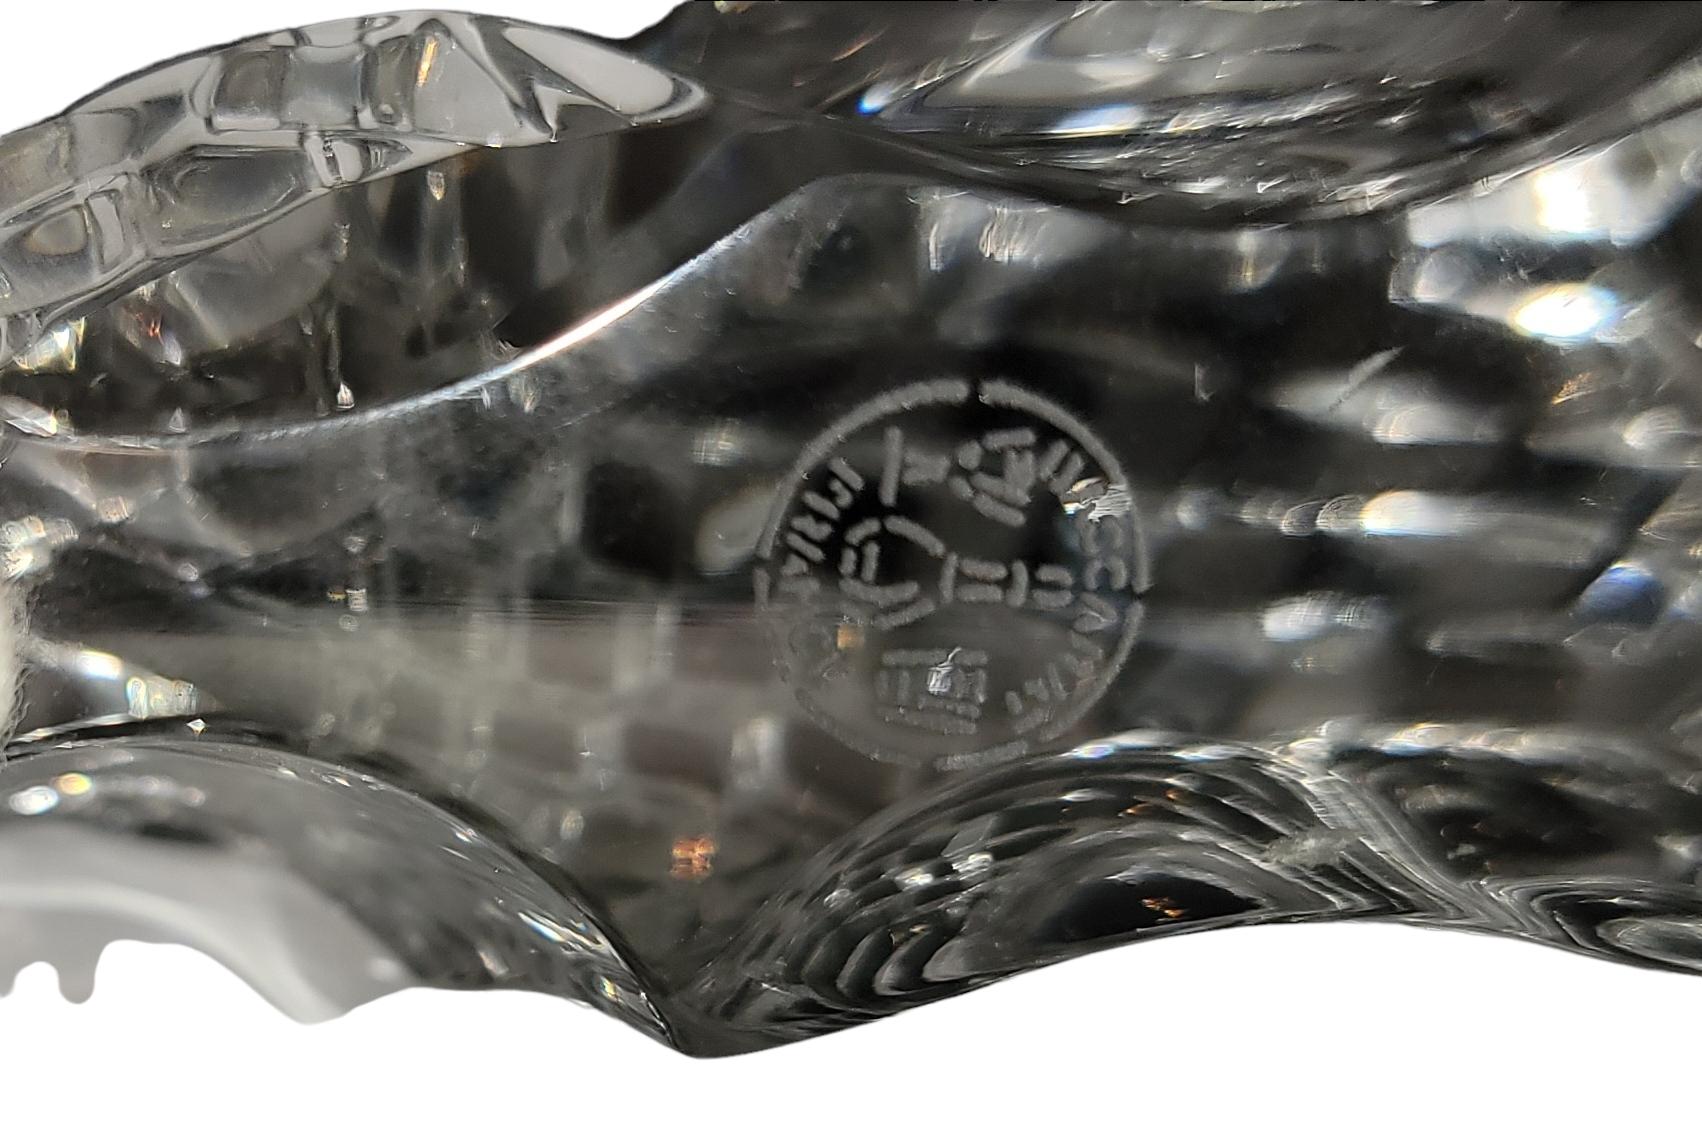 Baccarat Crystal Zodiac Dragon. This dragon is in great shape, the baccarat signature is visible. There is no damage to the dragon. Measures approx - 5.5w x 2.5d x 4h